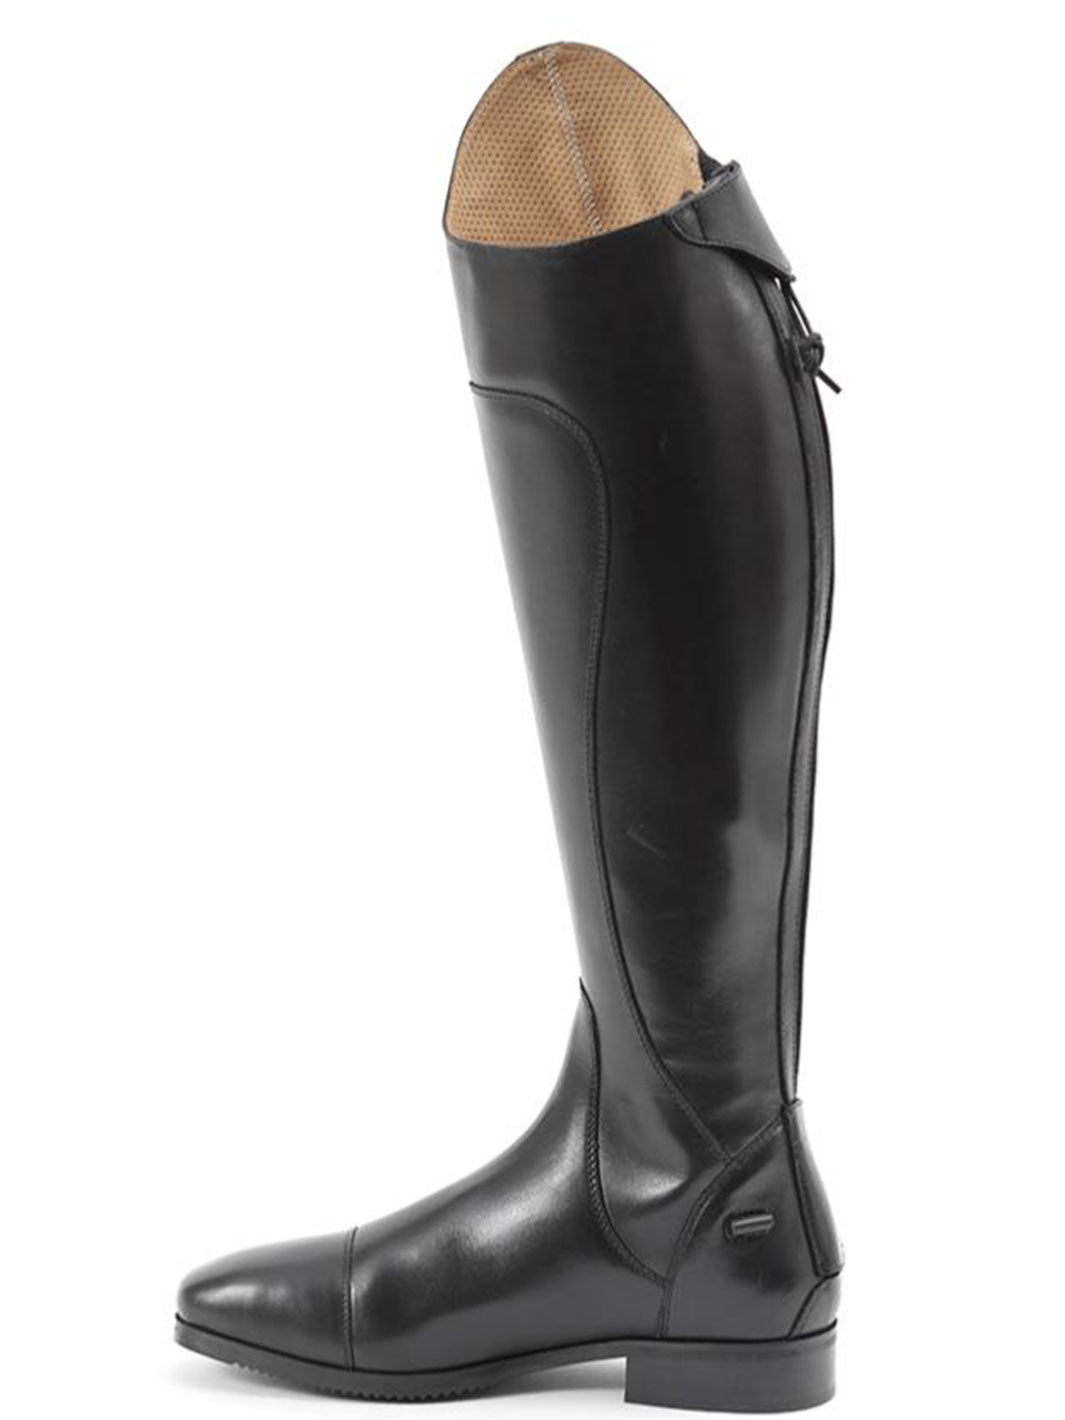 PE Mazziano Ladies Long Leather Dress Riding Boots Black